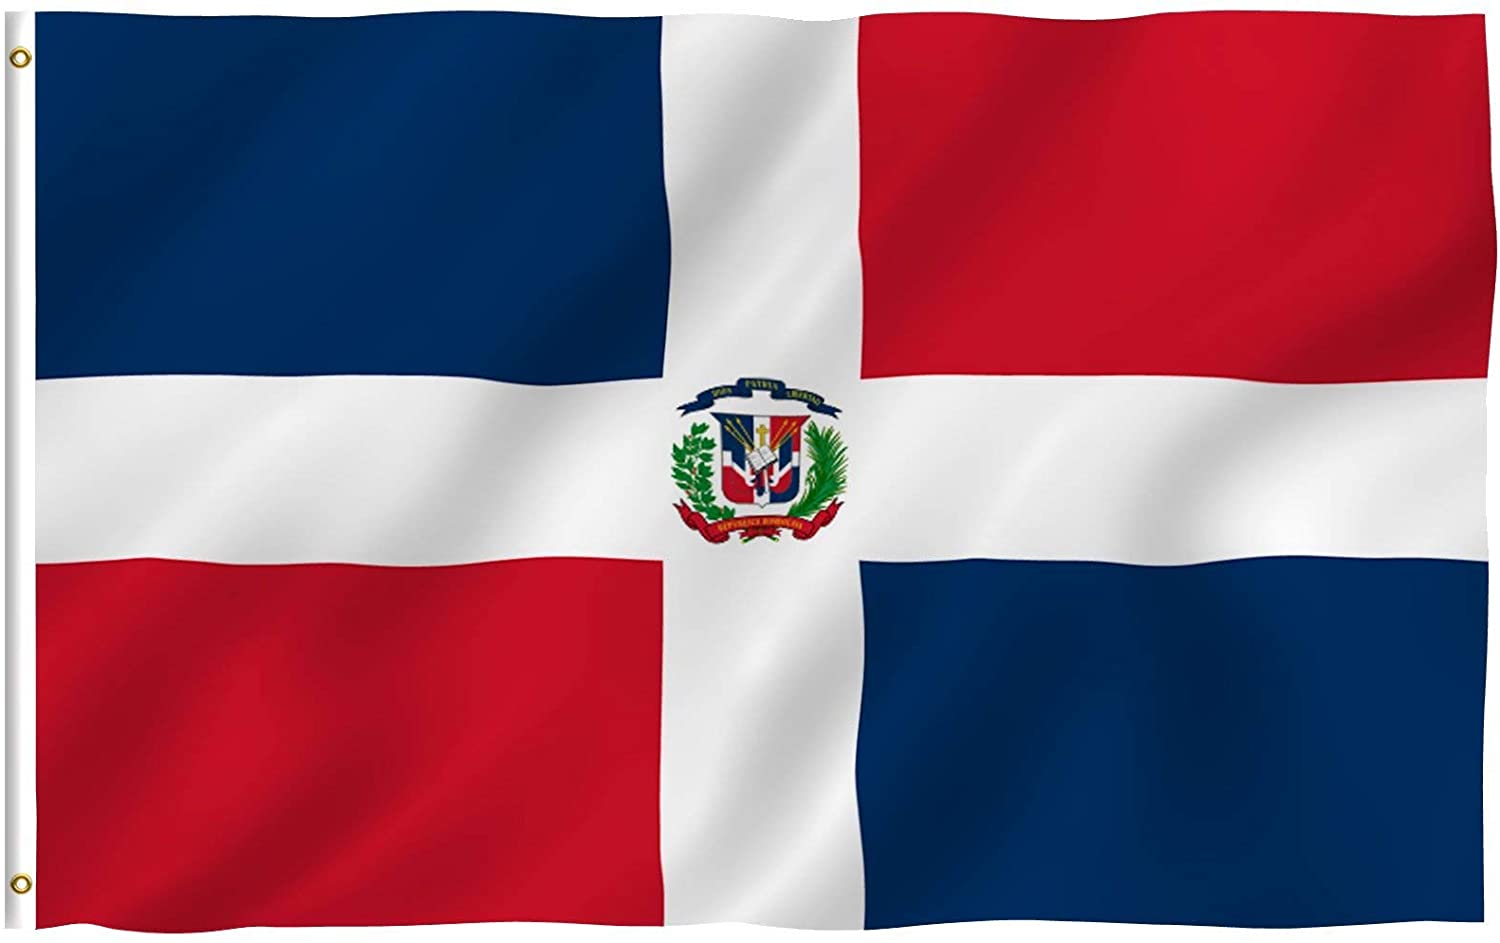 5' Wood Flag Pole Kit Wall Mount Bracket With 3x5 Dominican Republic Poly Flag 